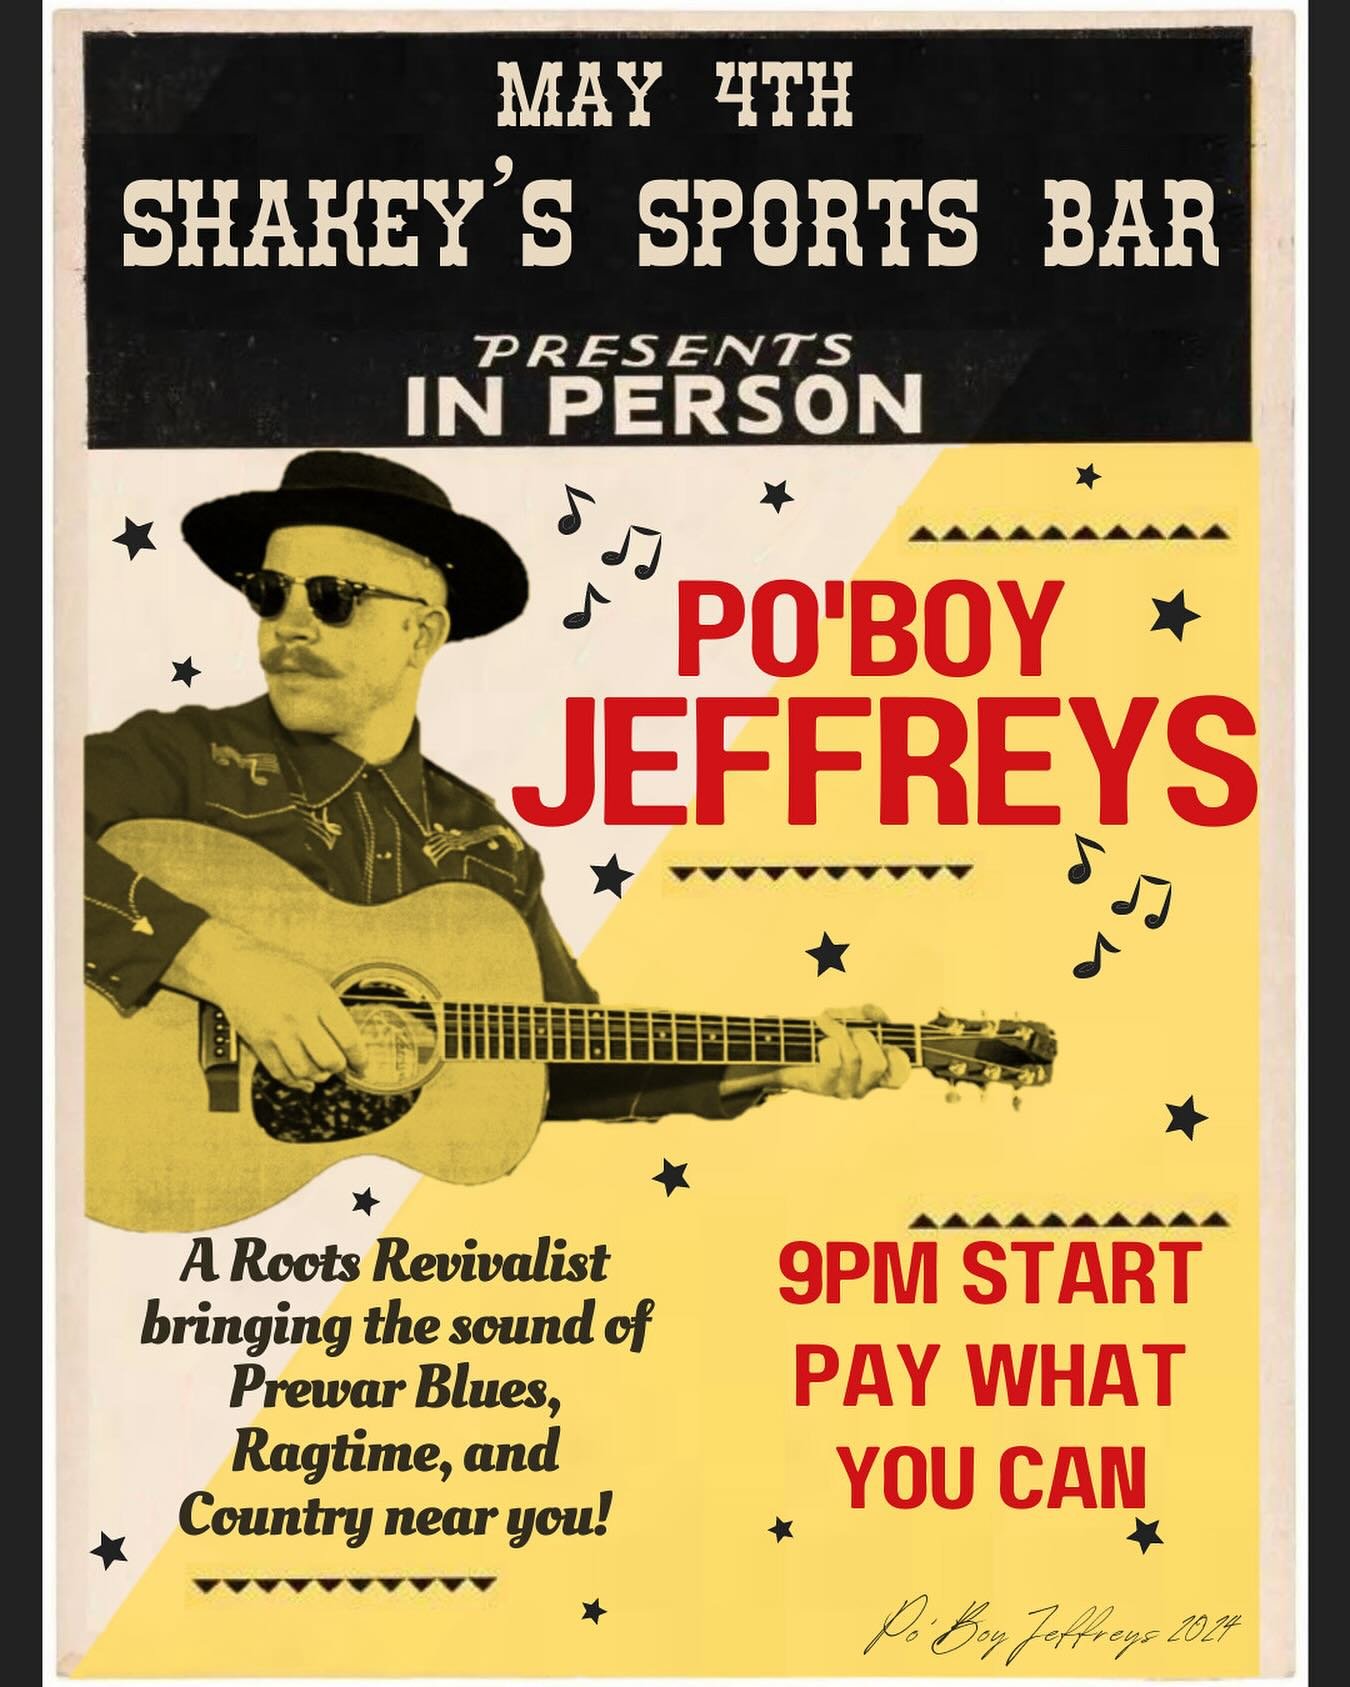 🎶 Live Music 🎶

We&rsquo;re very excited to announce a new musician @poboyjeffreys to Shakey&rsquo;s this Saturday, May 4th at 9pm

Sponsored by @amsterdambeer with $10 Mini Pitchers 🍻

Call 416-767-0608 to reserve your table 📞

*In the event of 